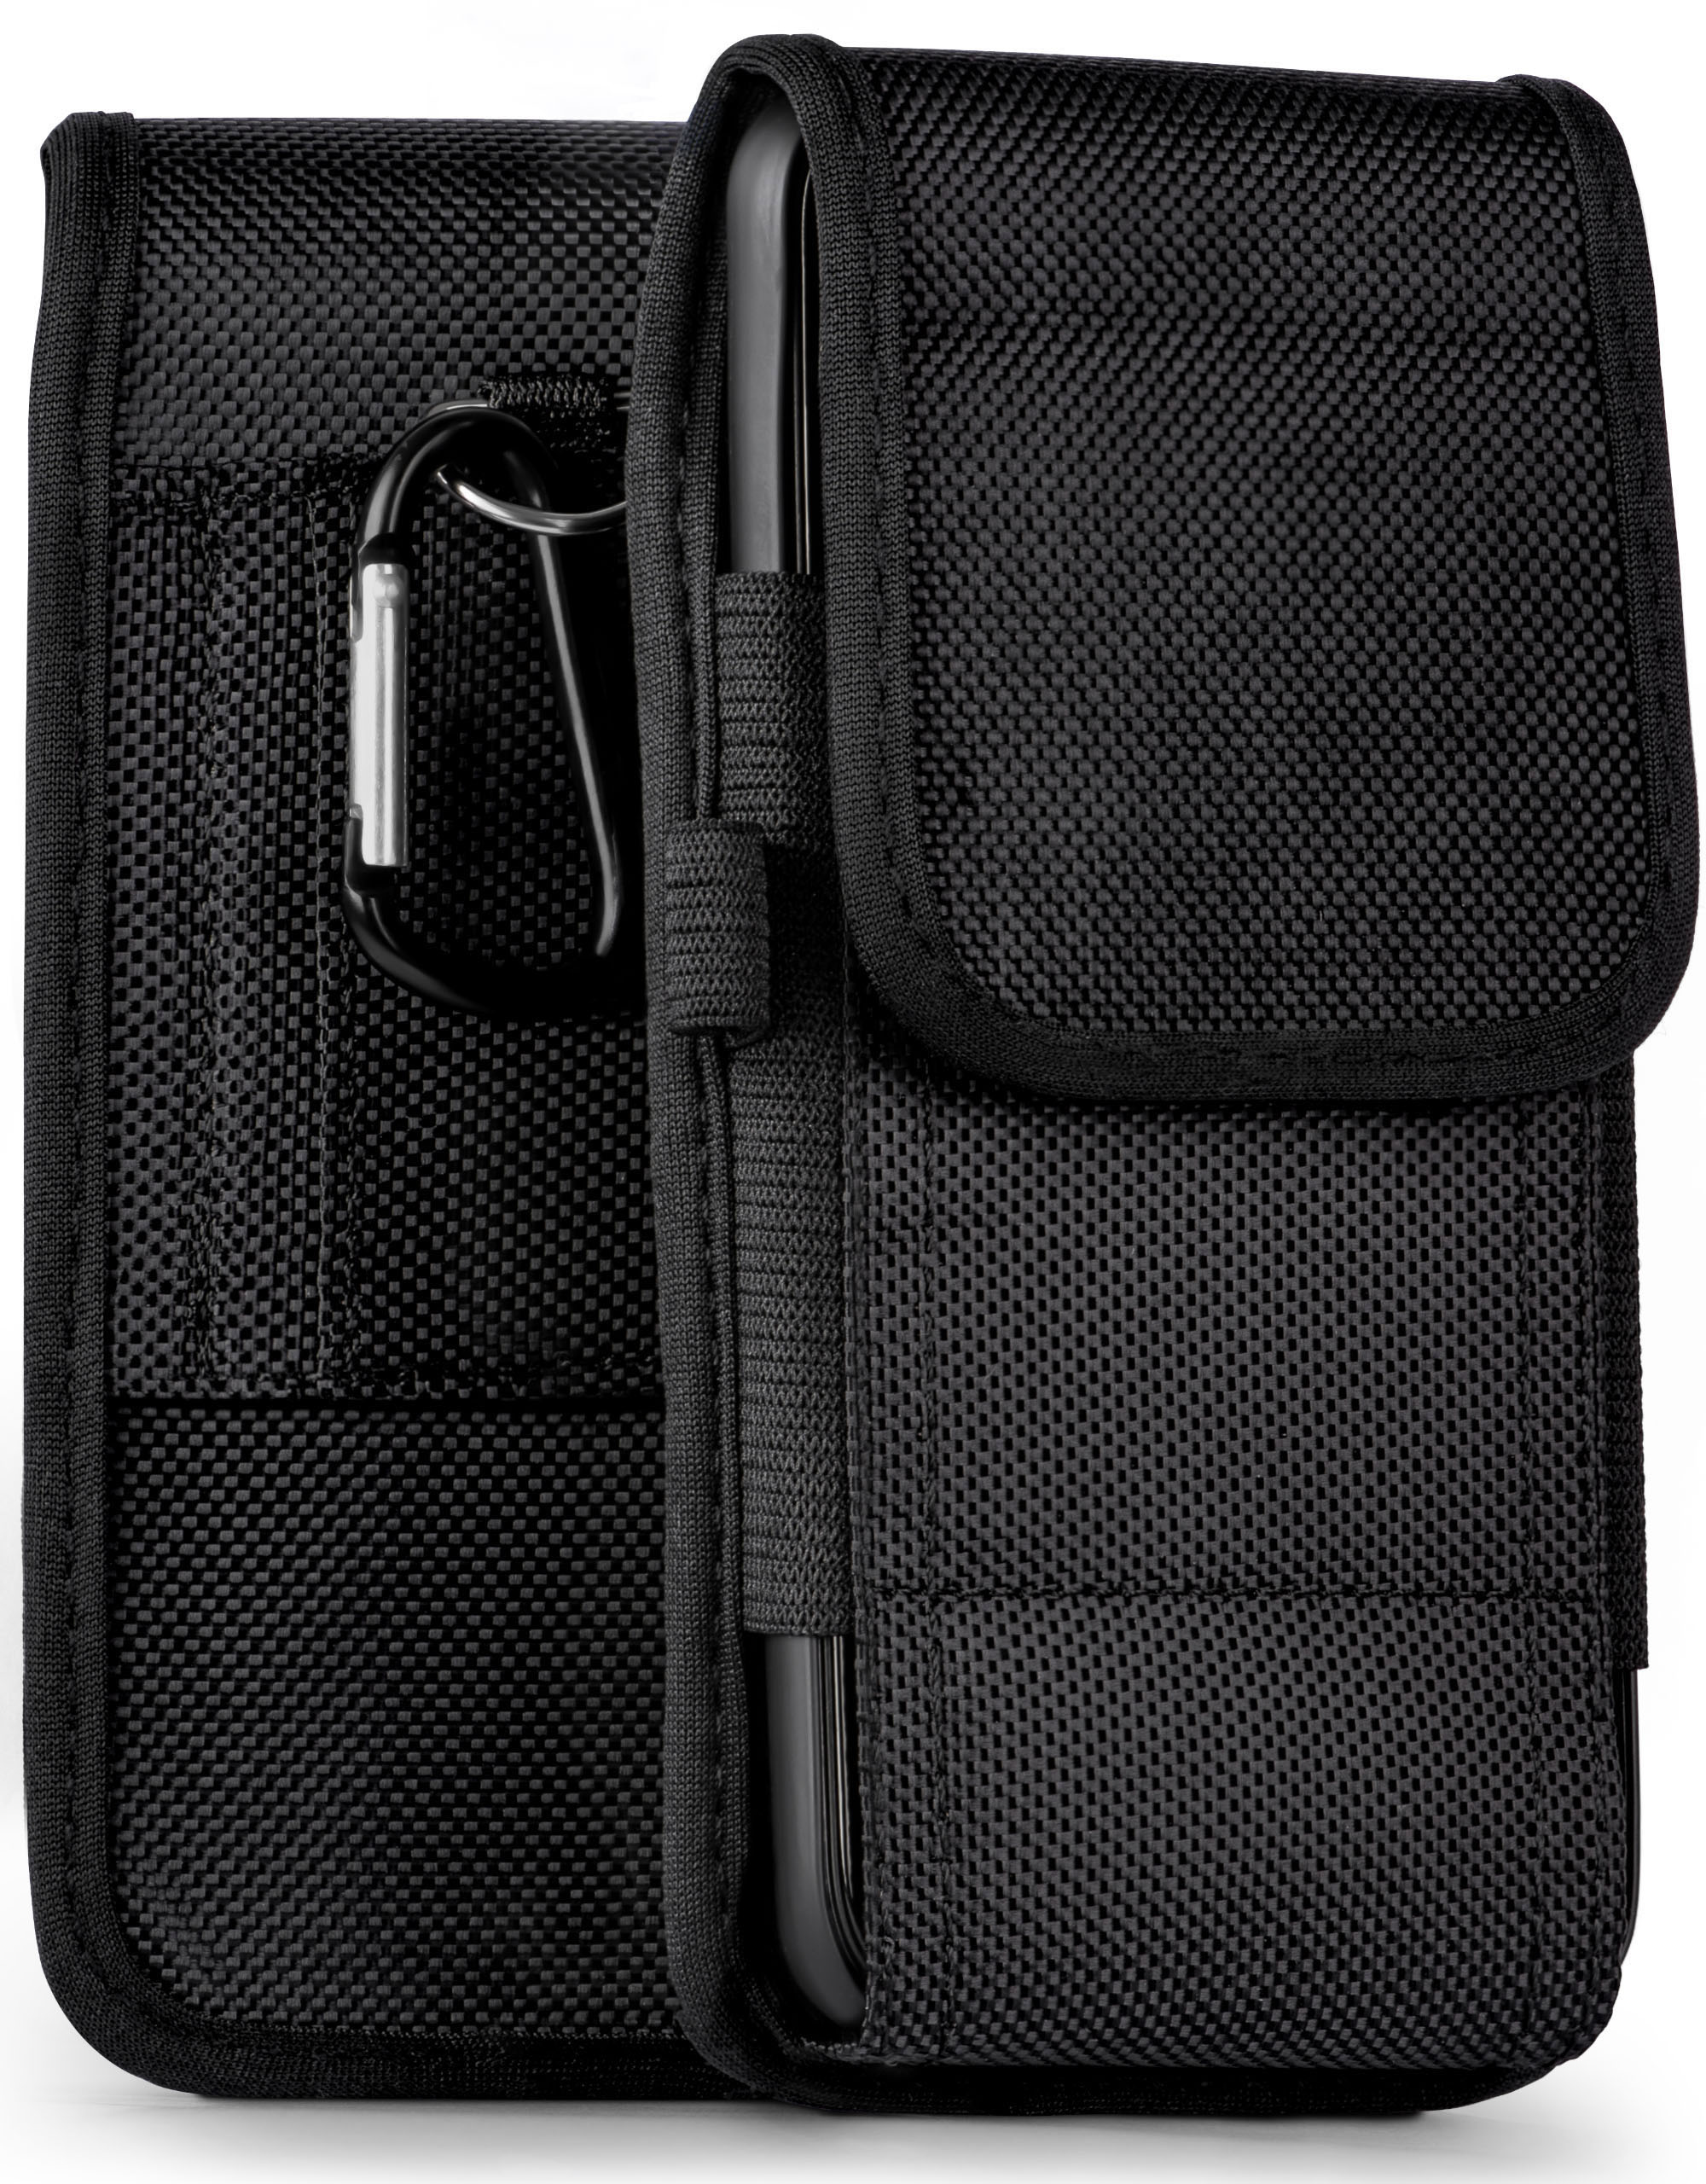 Trail MOEX Case, 5, Holster, Agility Nokia,